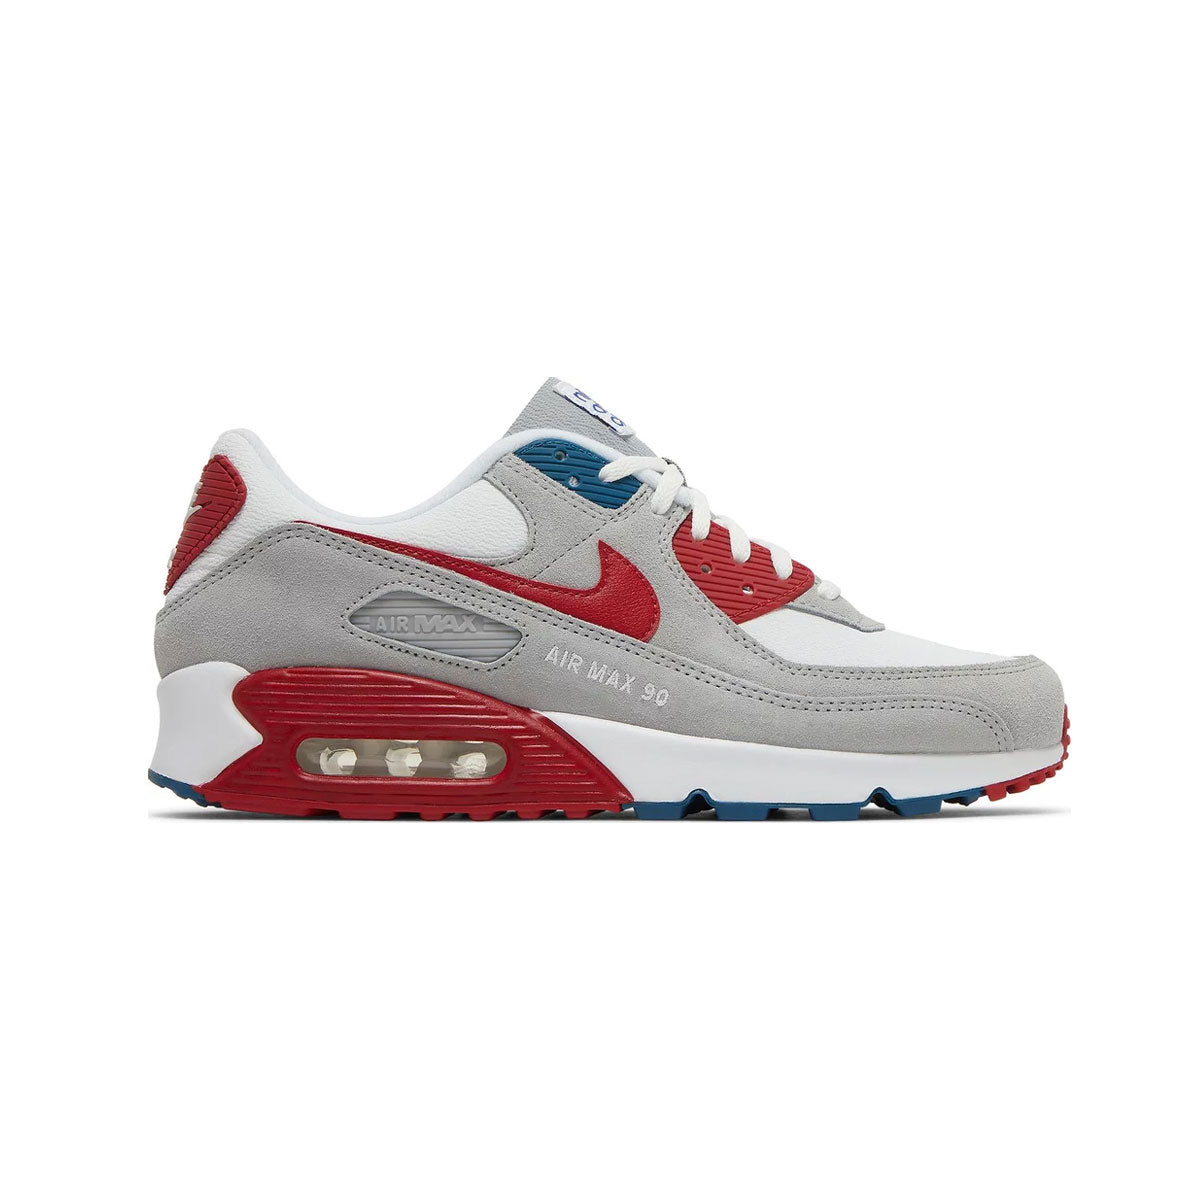 Nike Air Max 90 Shoes 'Athletic Club' Gray White Red - KickzStore